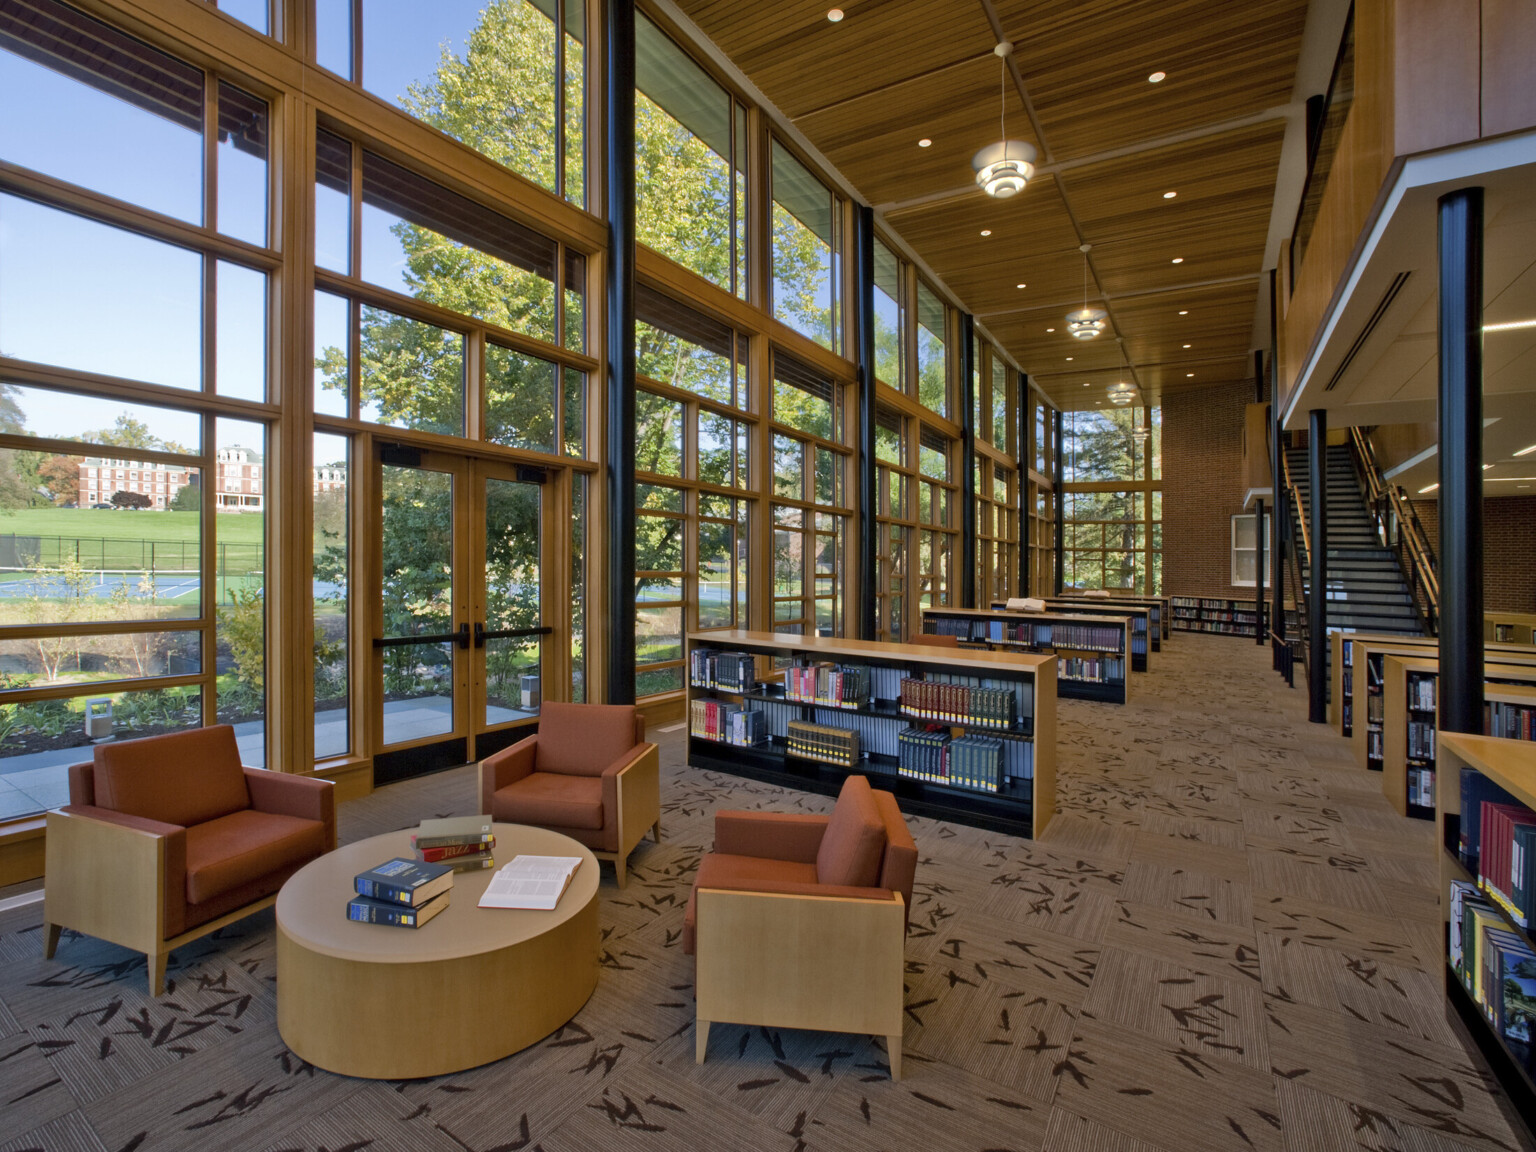 Double height library seating area with half height shelves and armchair seating, glass facade with wood accents